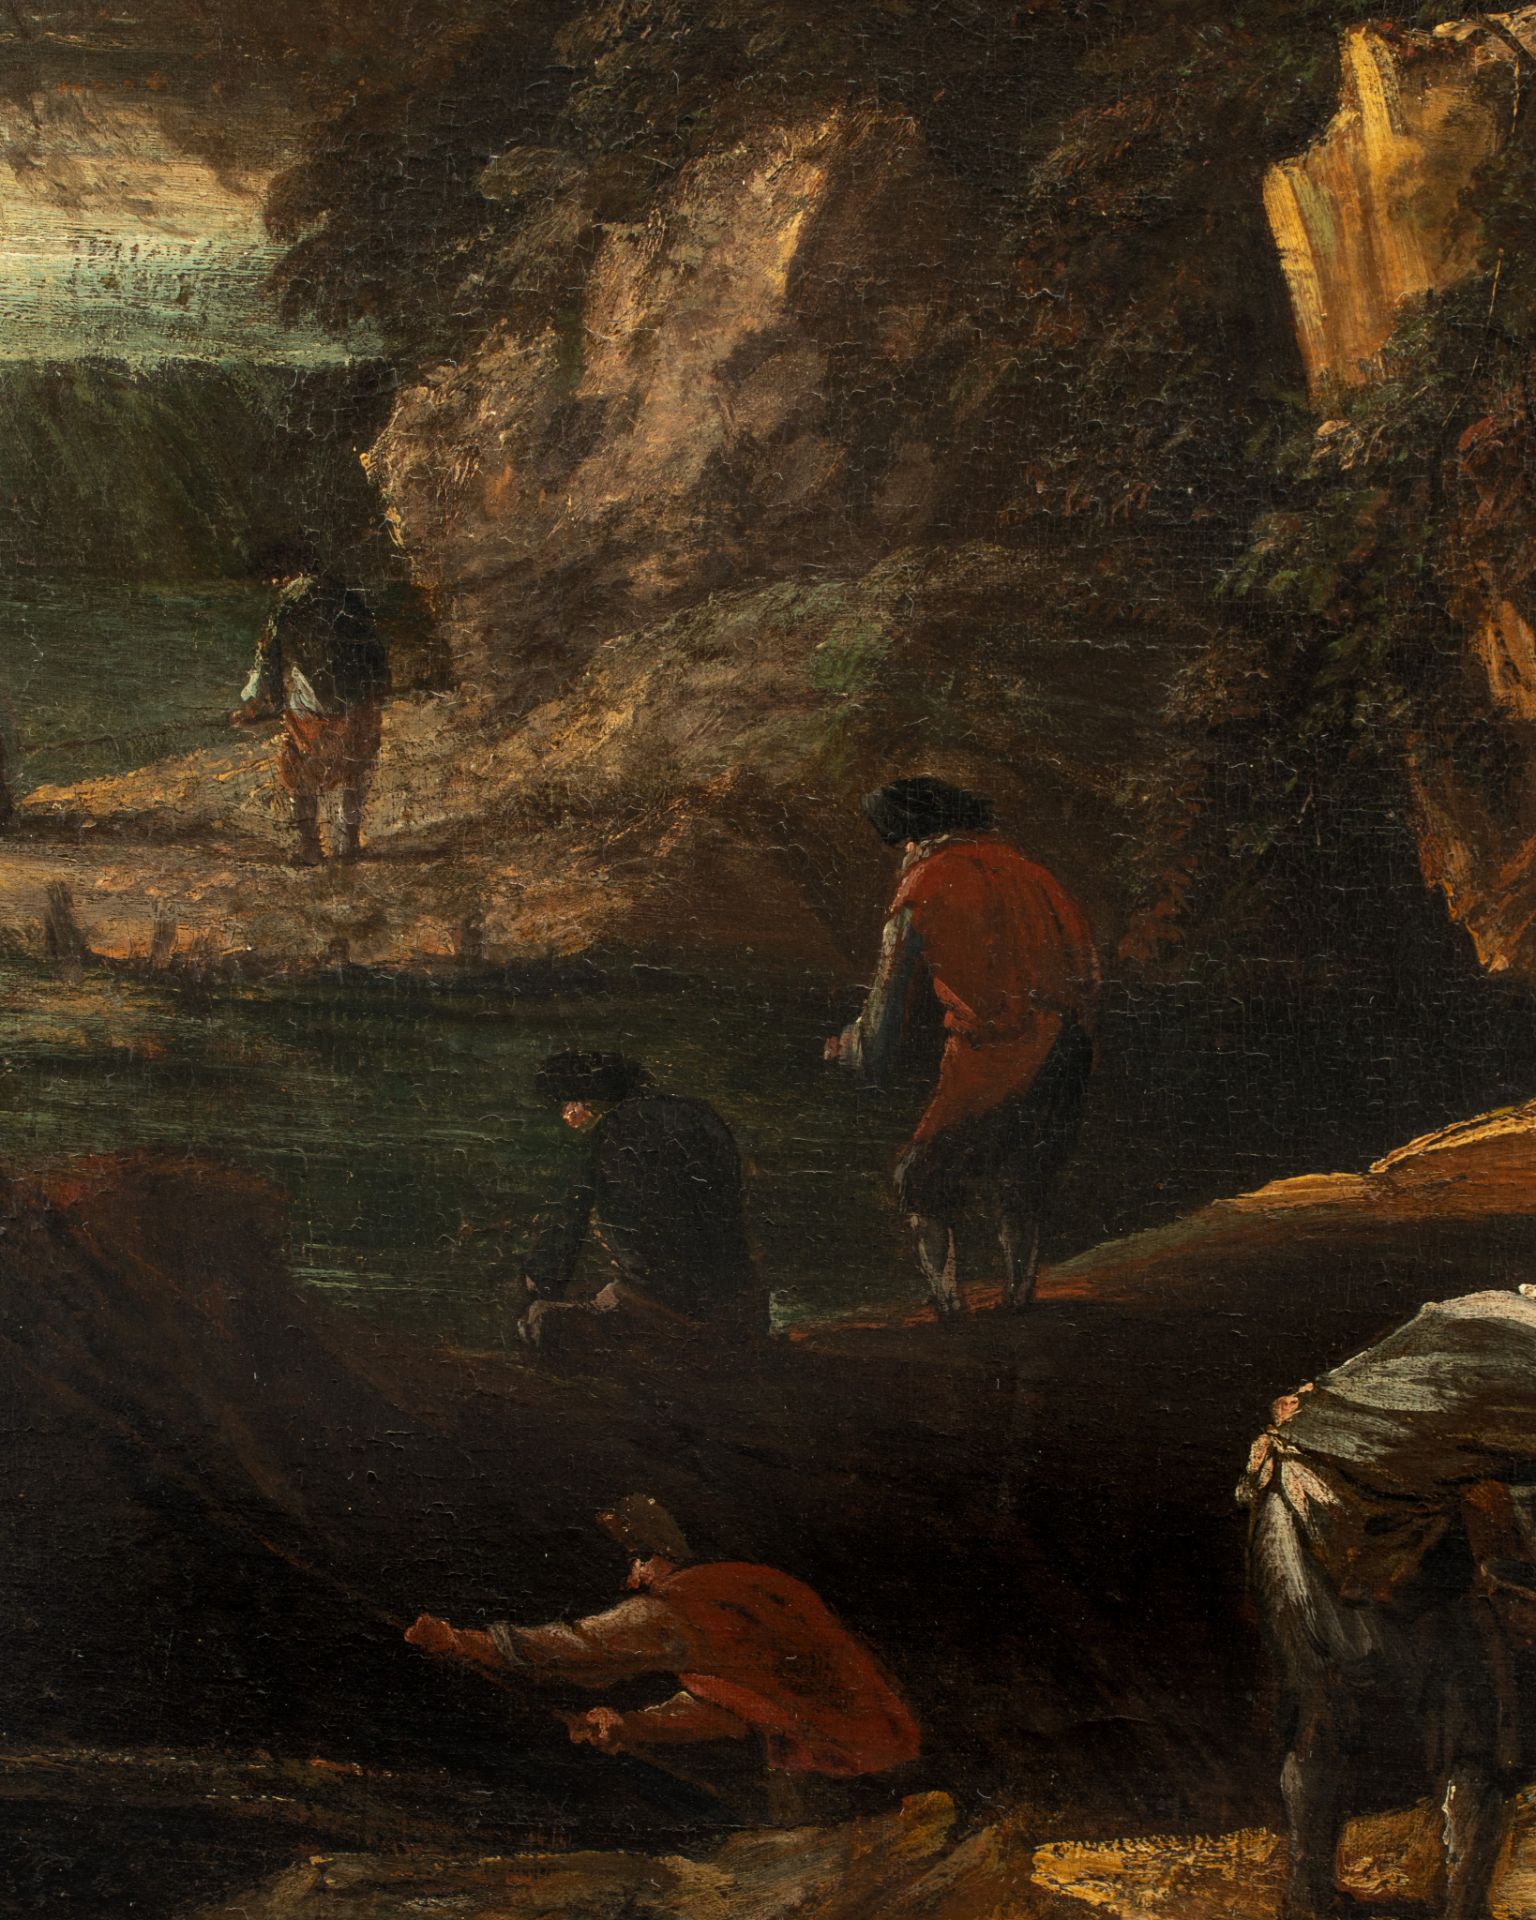 Attributed to Salvator Rosa (1615-1673), the golddiggers, oil on canvas, 120 x 140 cm - Bild 5 aus 8